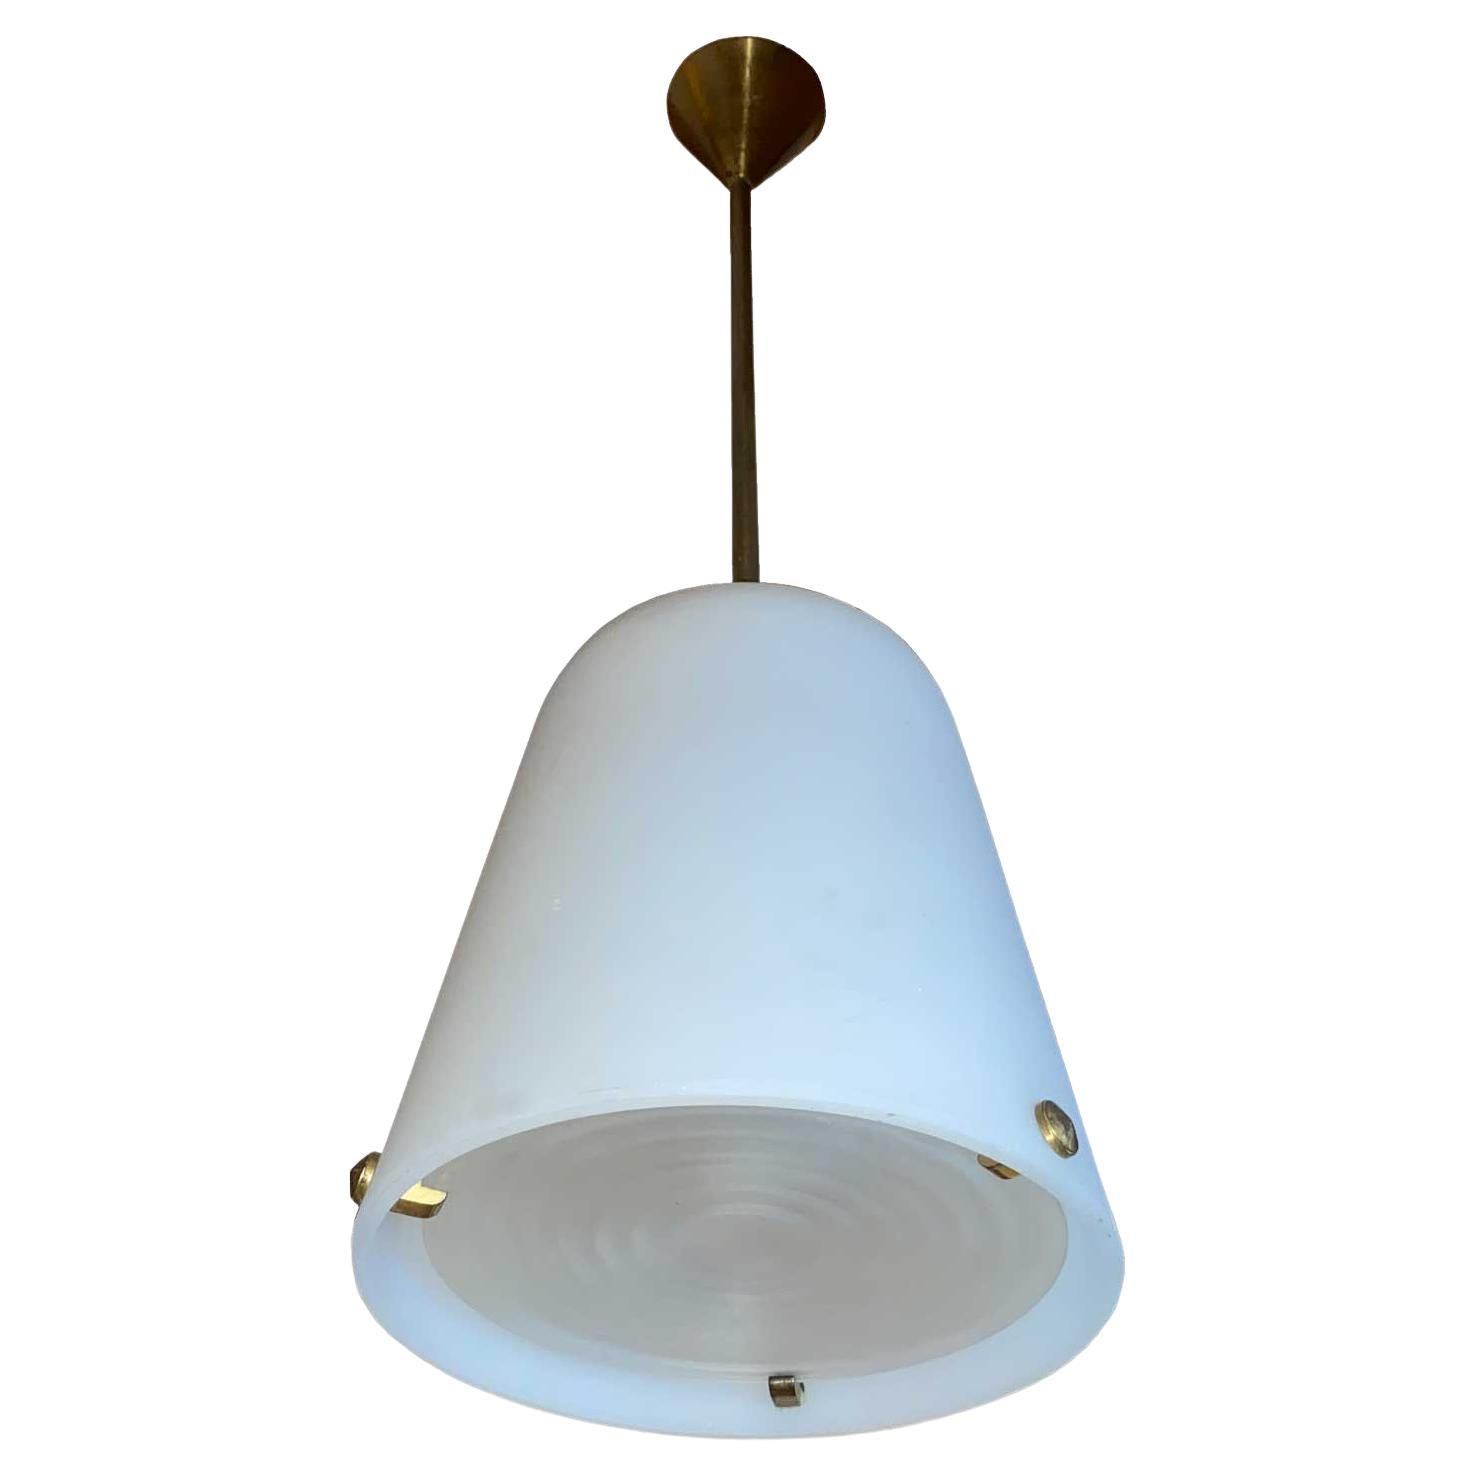 Perzel ceiling light n° 2015 in glass and gilded bronze For Sale